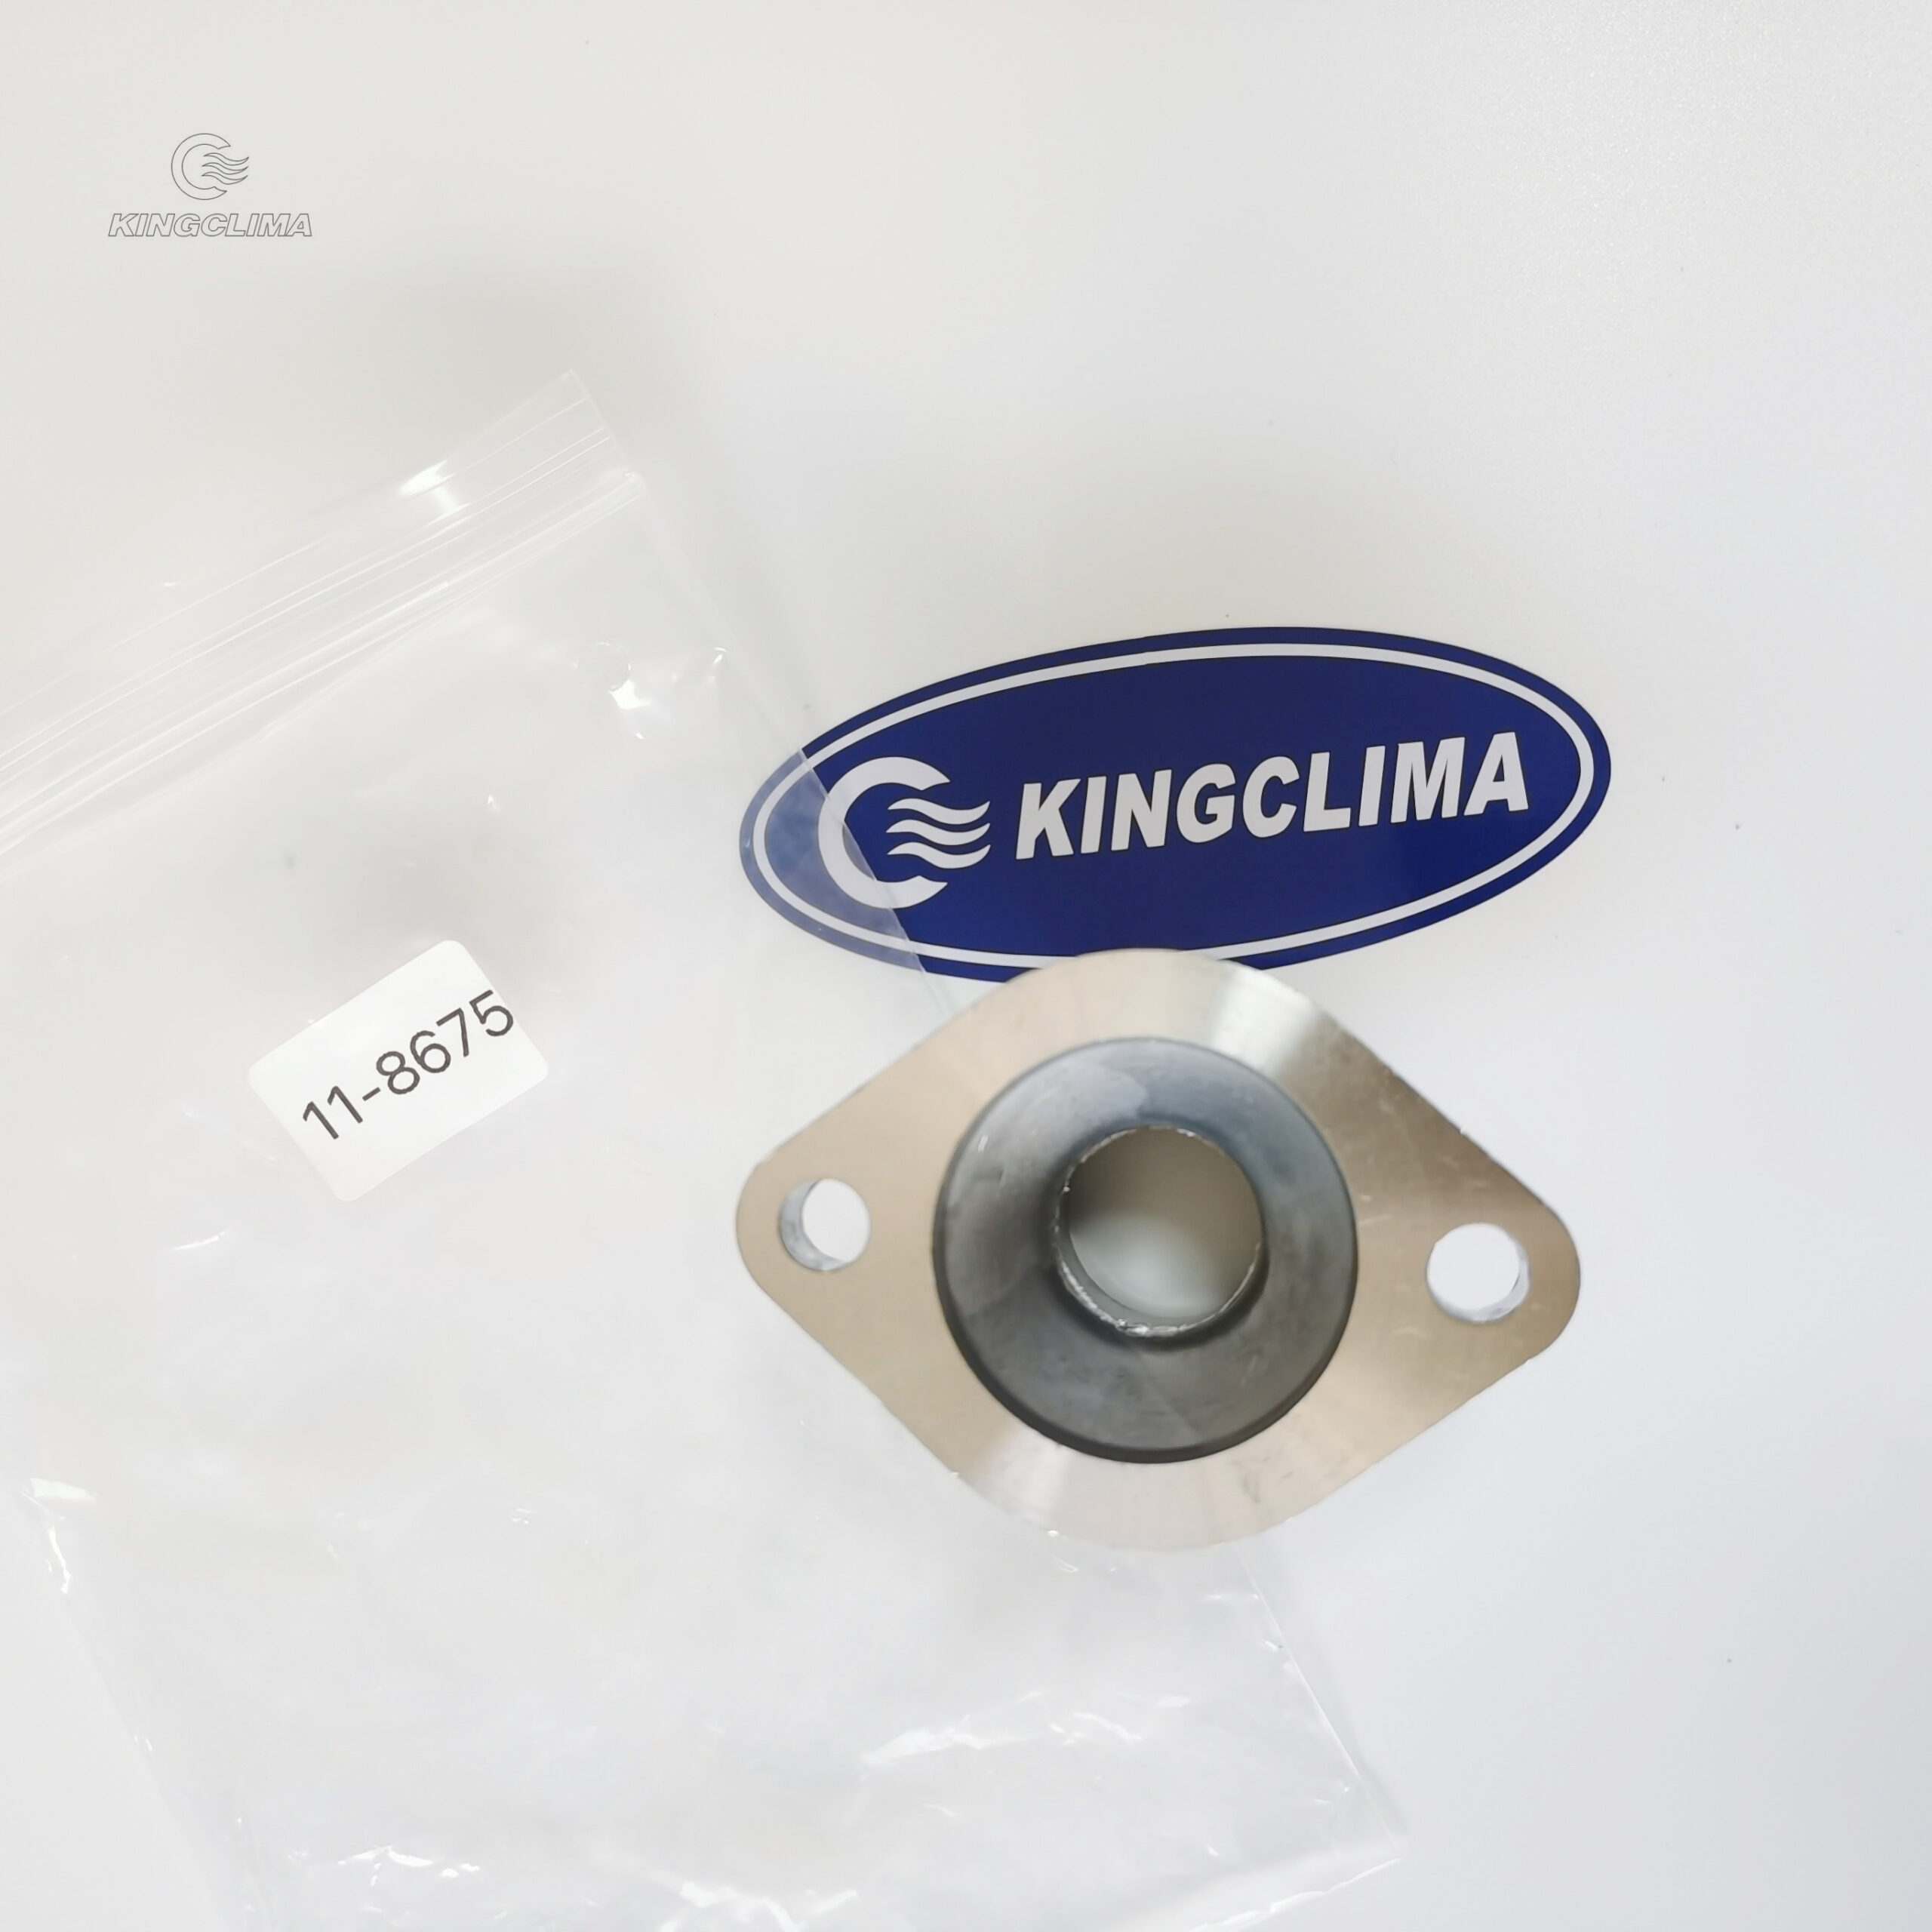 cover 11-8675 thermo  king parts for refrigeration units.